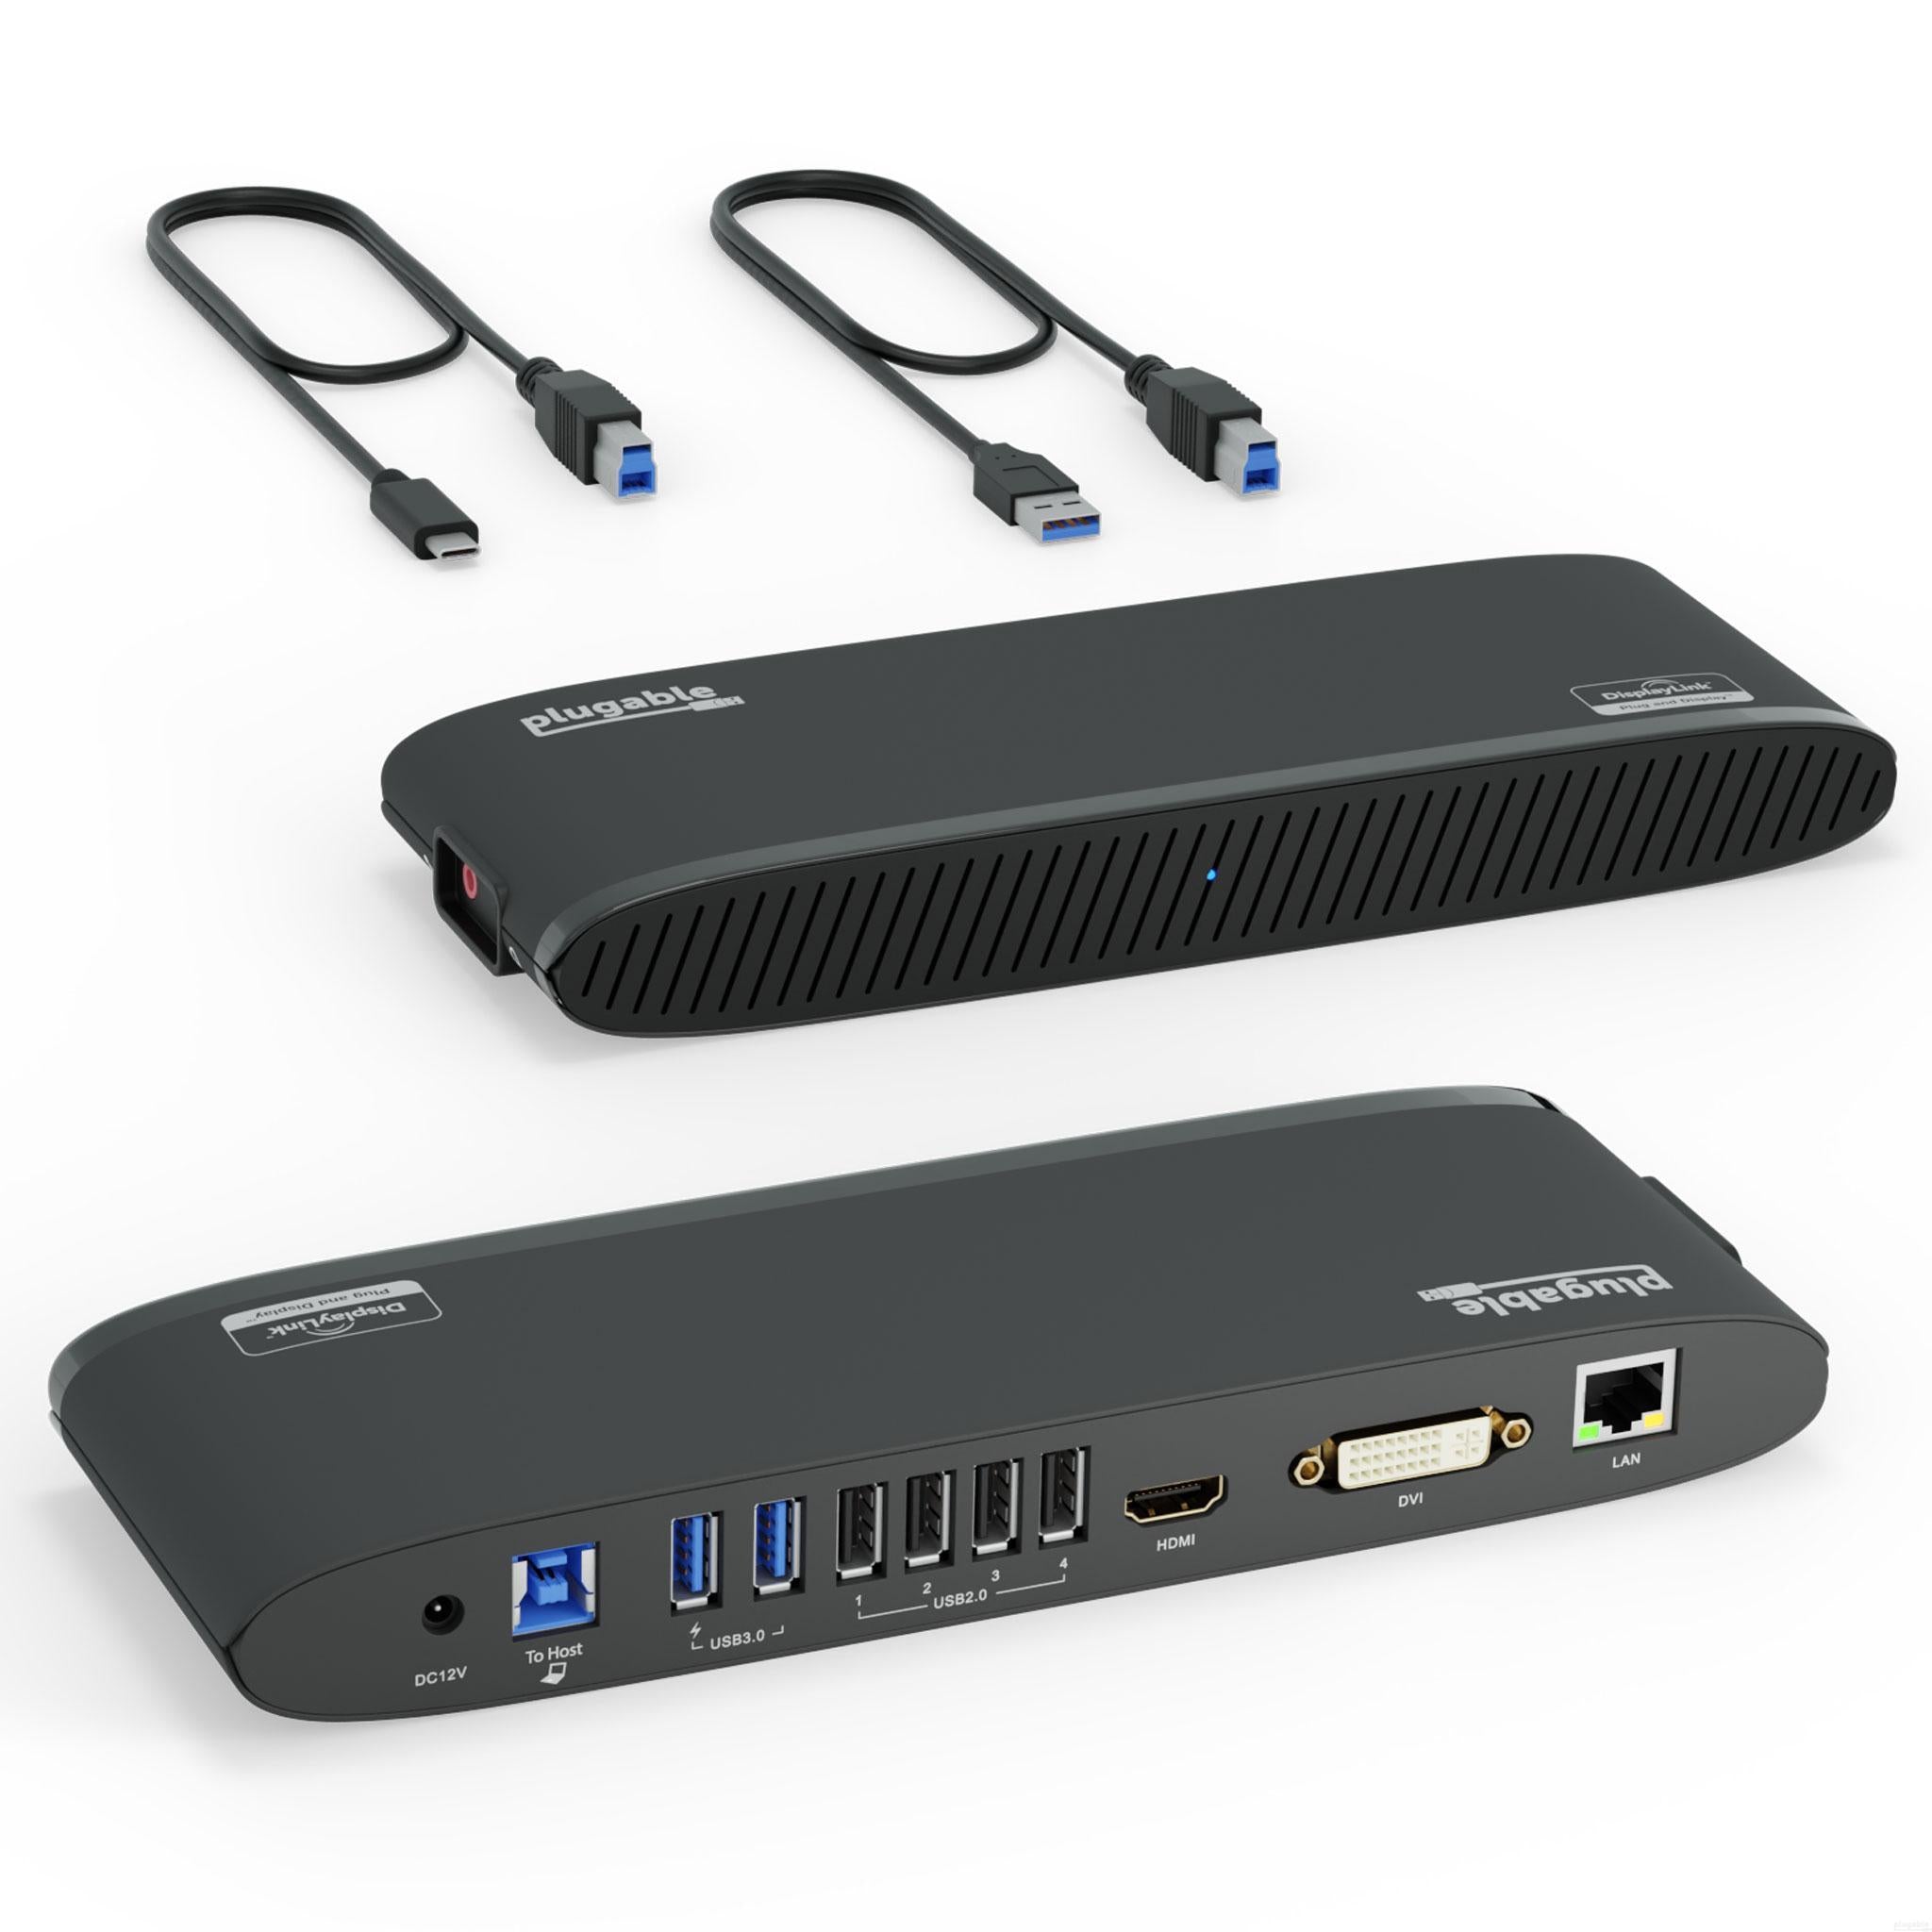 File:Thunderbolt 3 interface.png - Wikimedia Commons